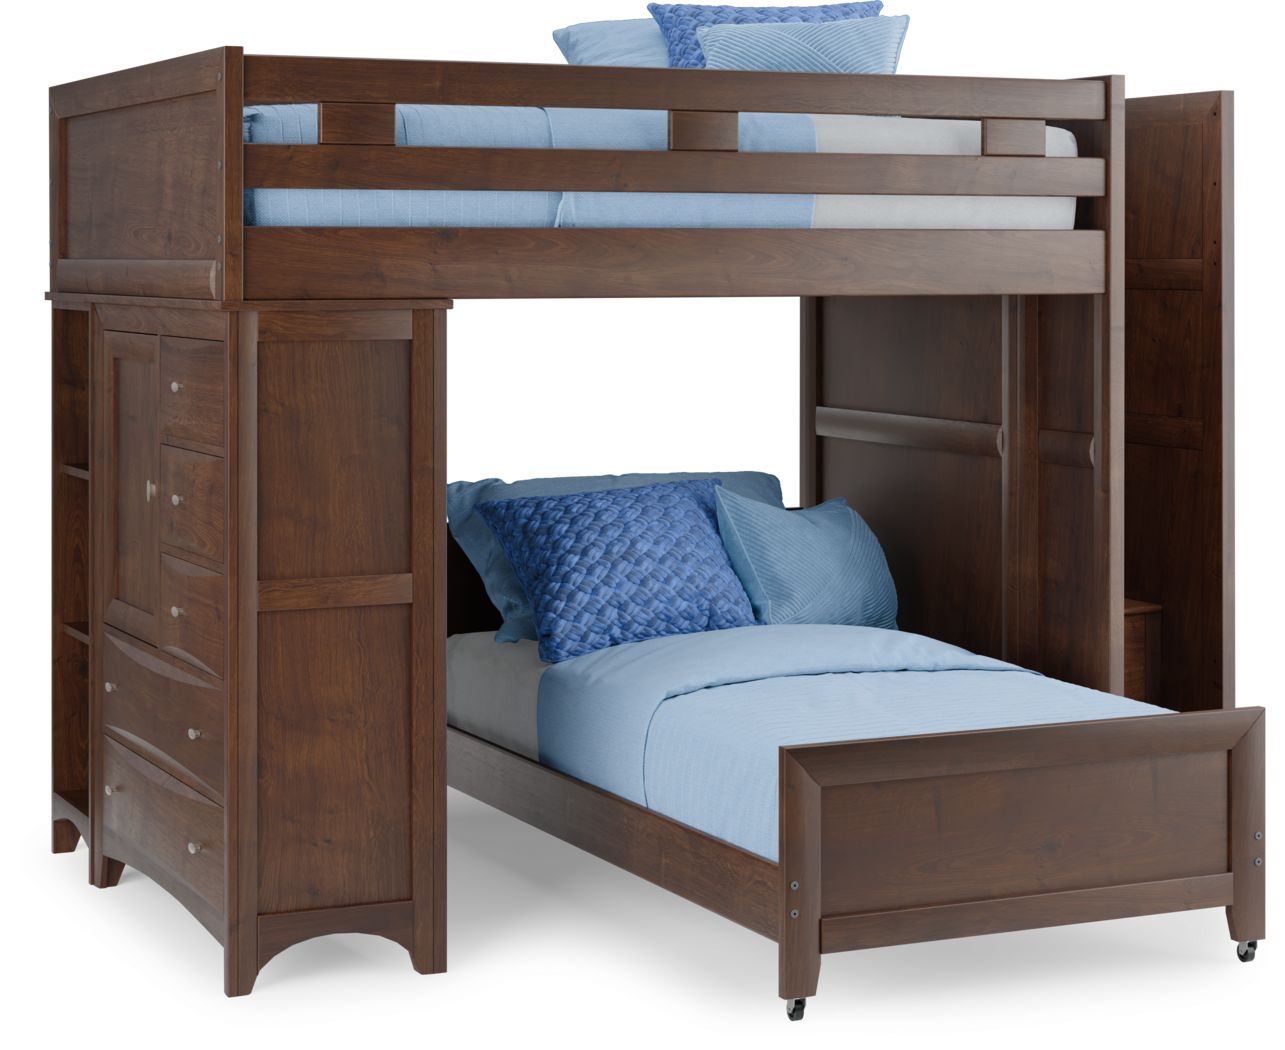 Ivy League Furniture Collection, Ercole Full Mate S Bed With 12 Drawers And Bookcase